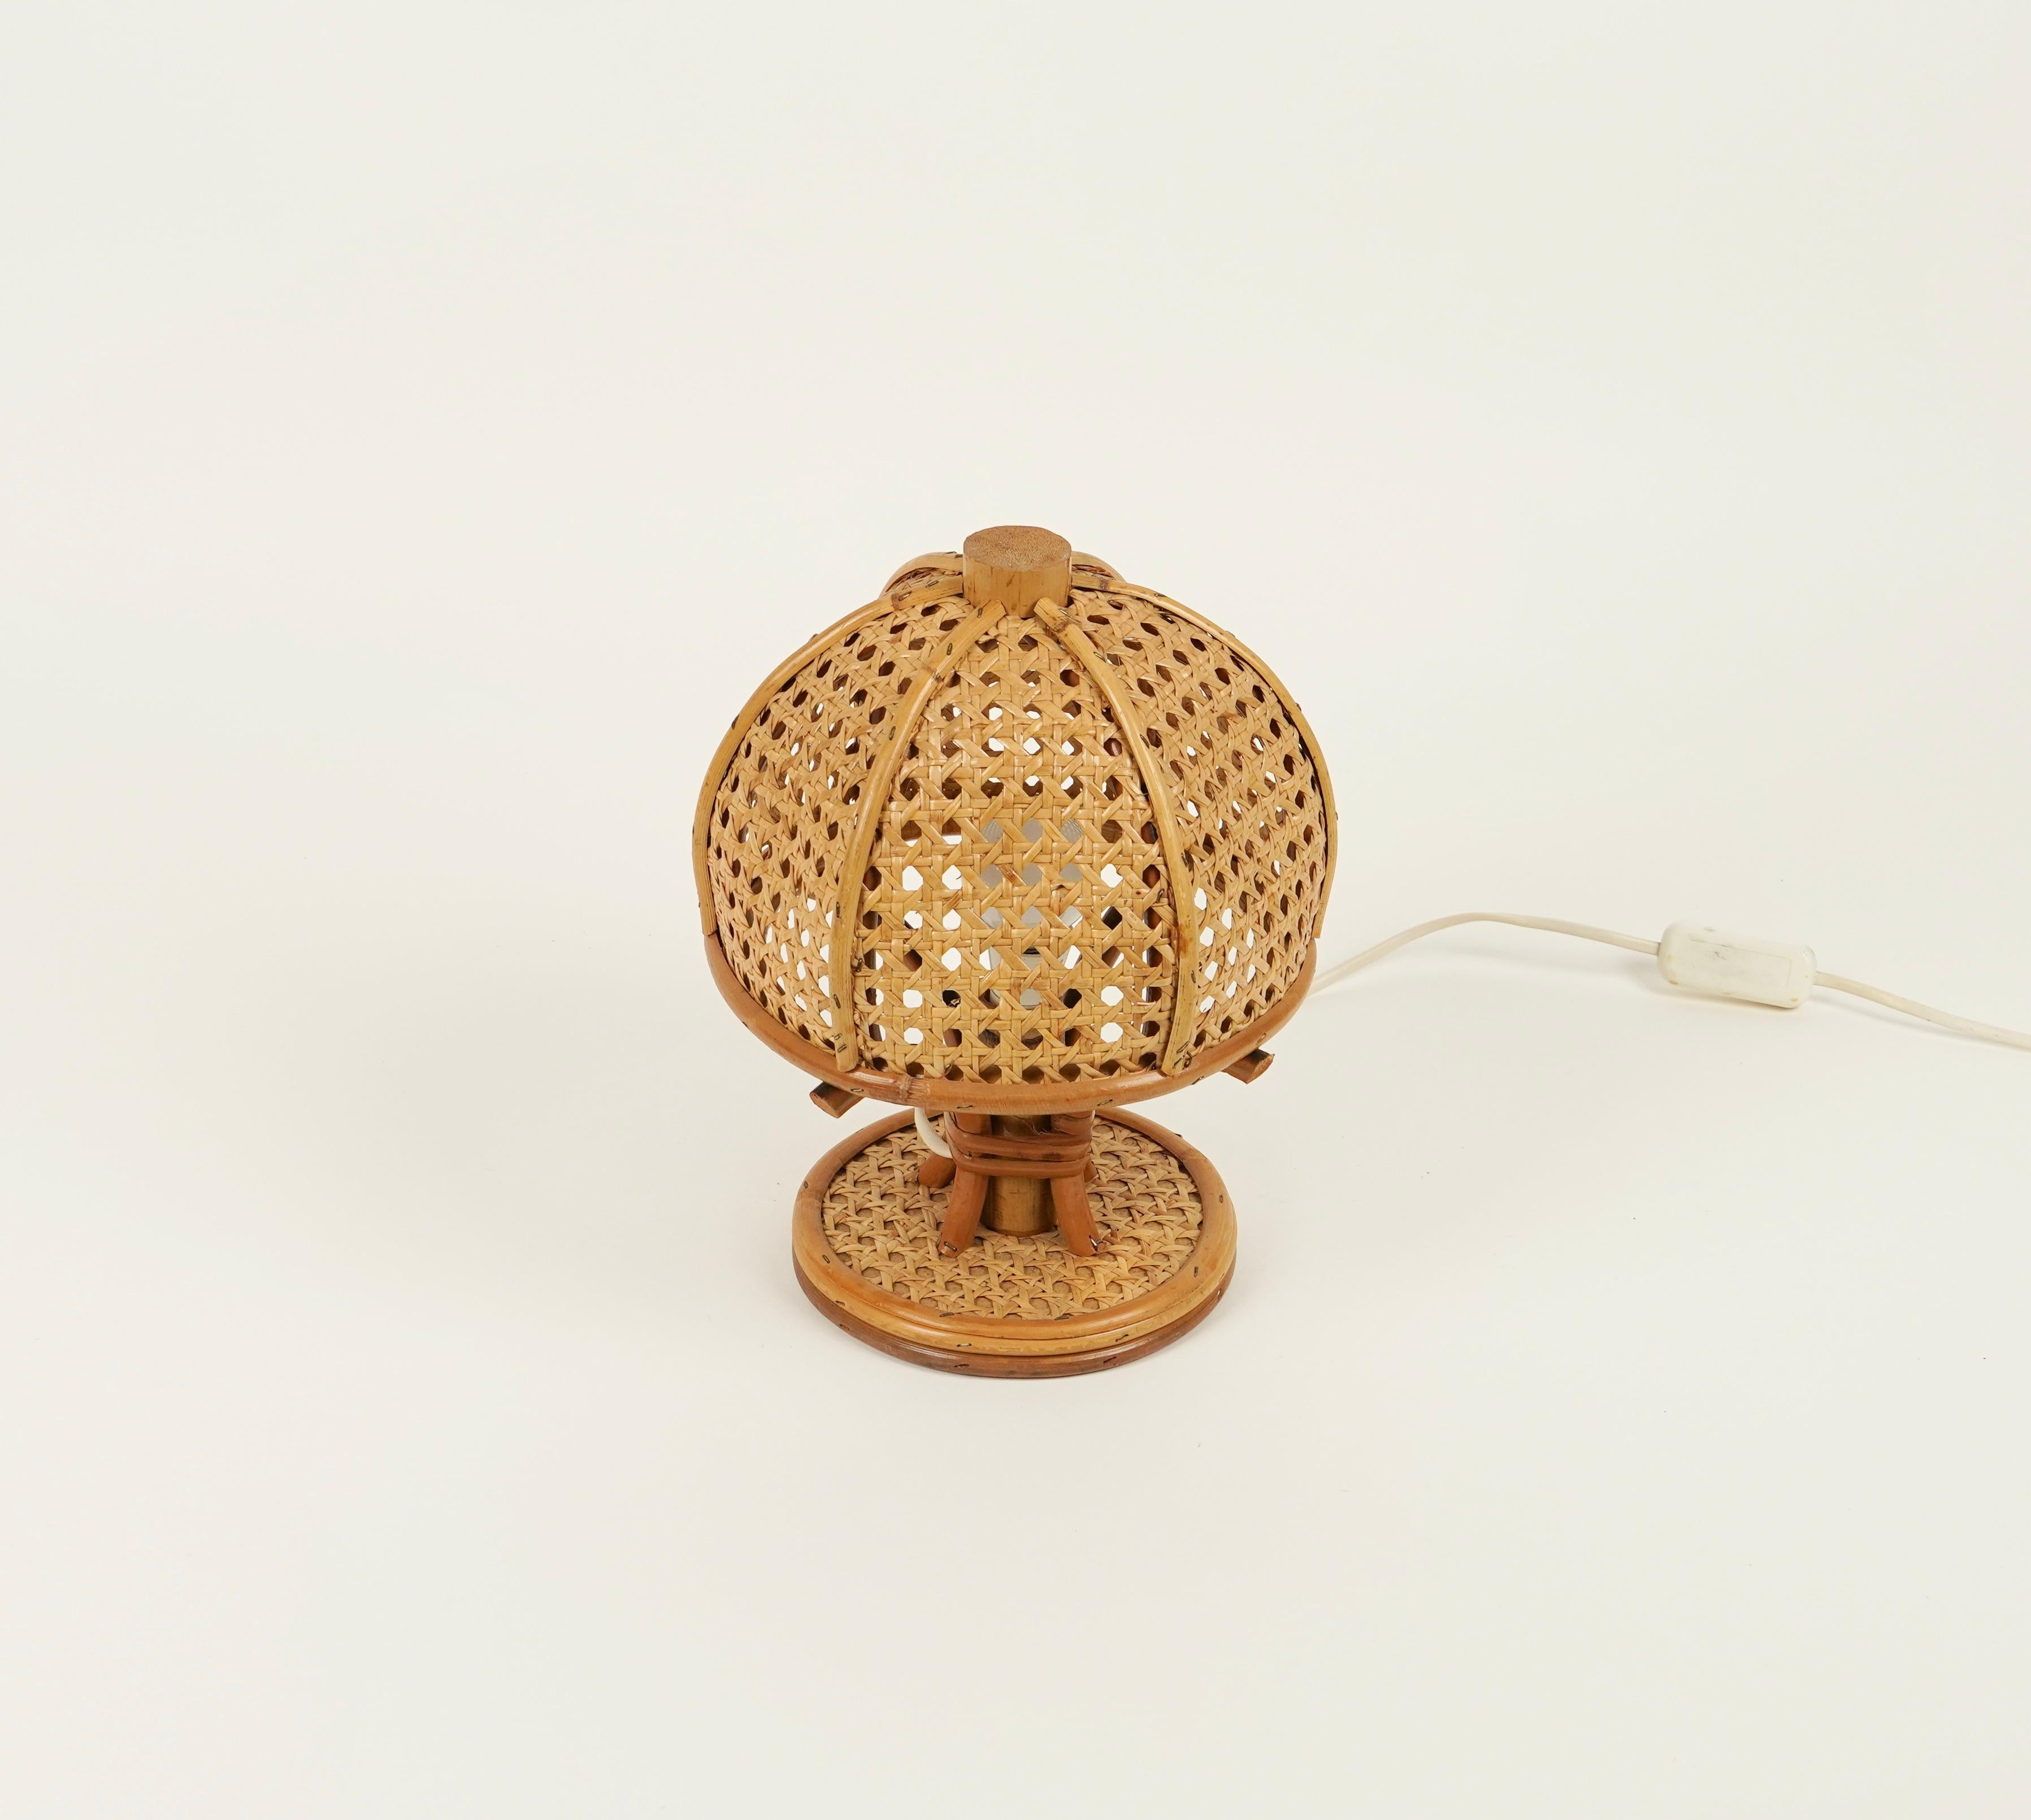 Midcentury Bamboo and Rattan Table Lamp Louis Sognot Style, Italy, 1970s For Sale 1